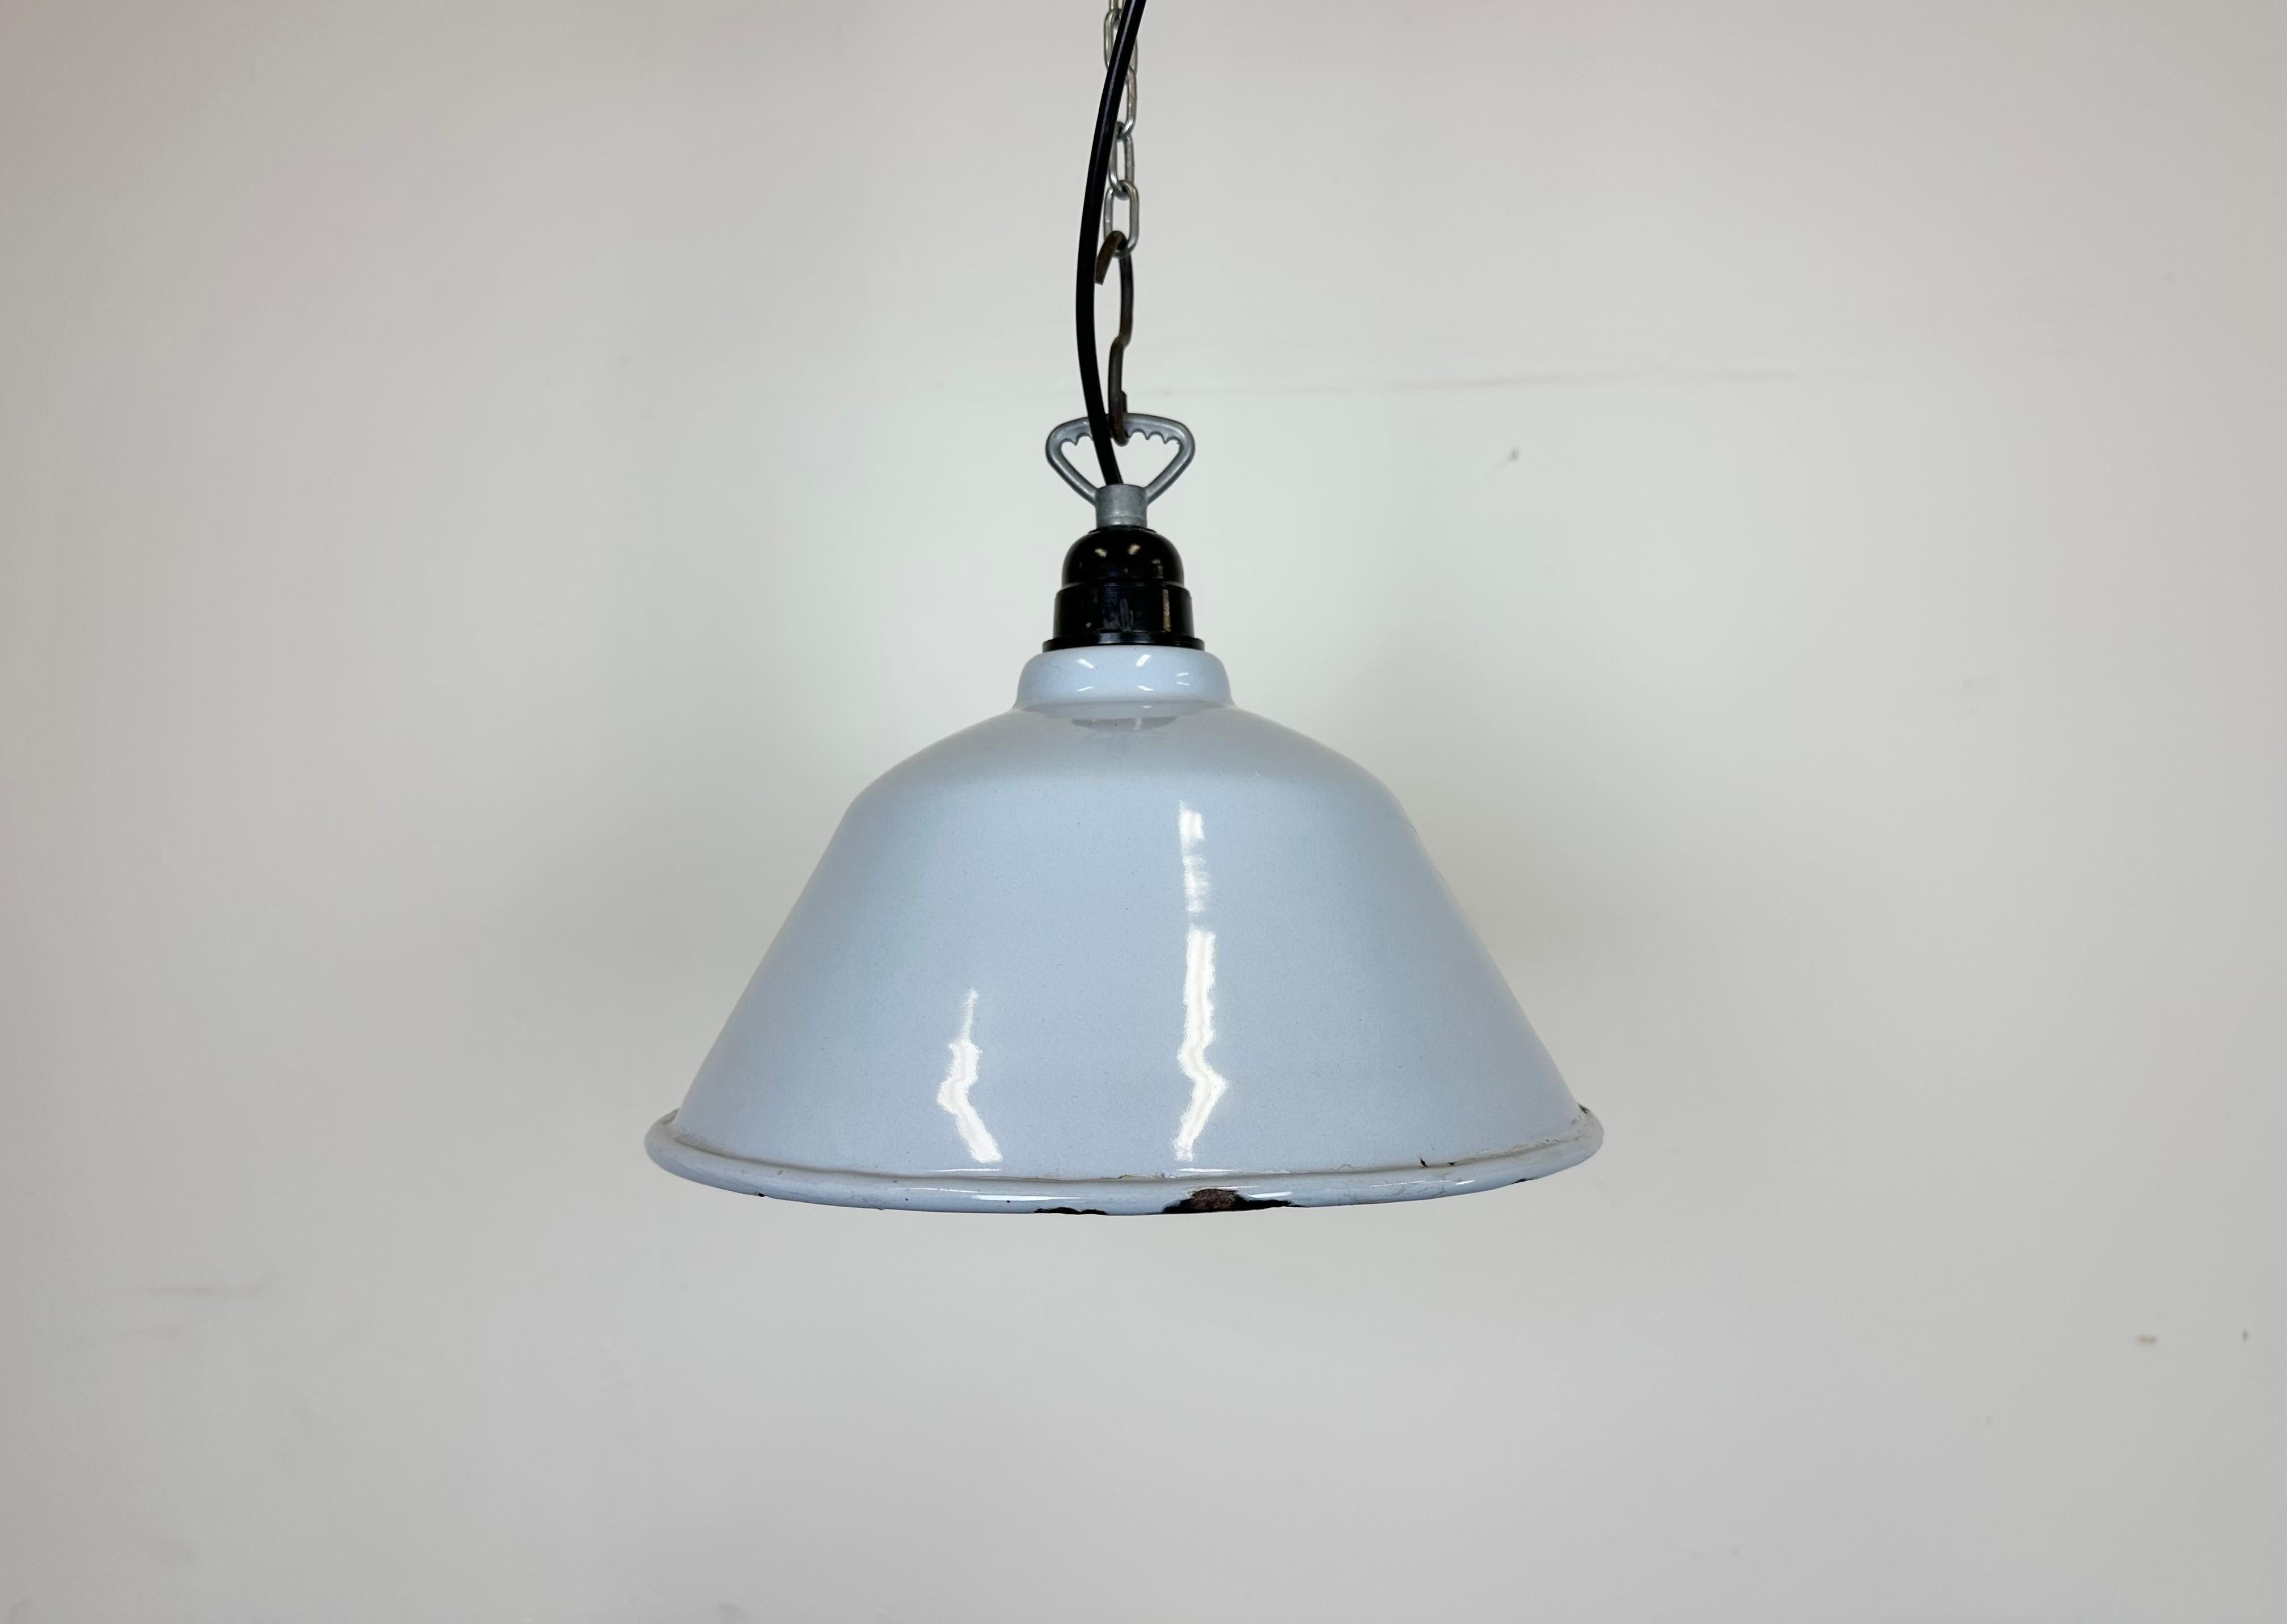 Industrial light grey enamel factory pendant light made in France during the 1960s. White enamel inside the shade. The bakelite socket with iron hook requires standard E 27/ E26 light bulbs. New wire. Fully functional. The weight of the lamp is  0,5